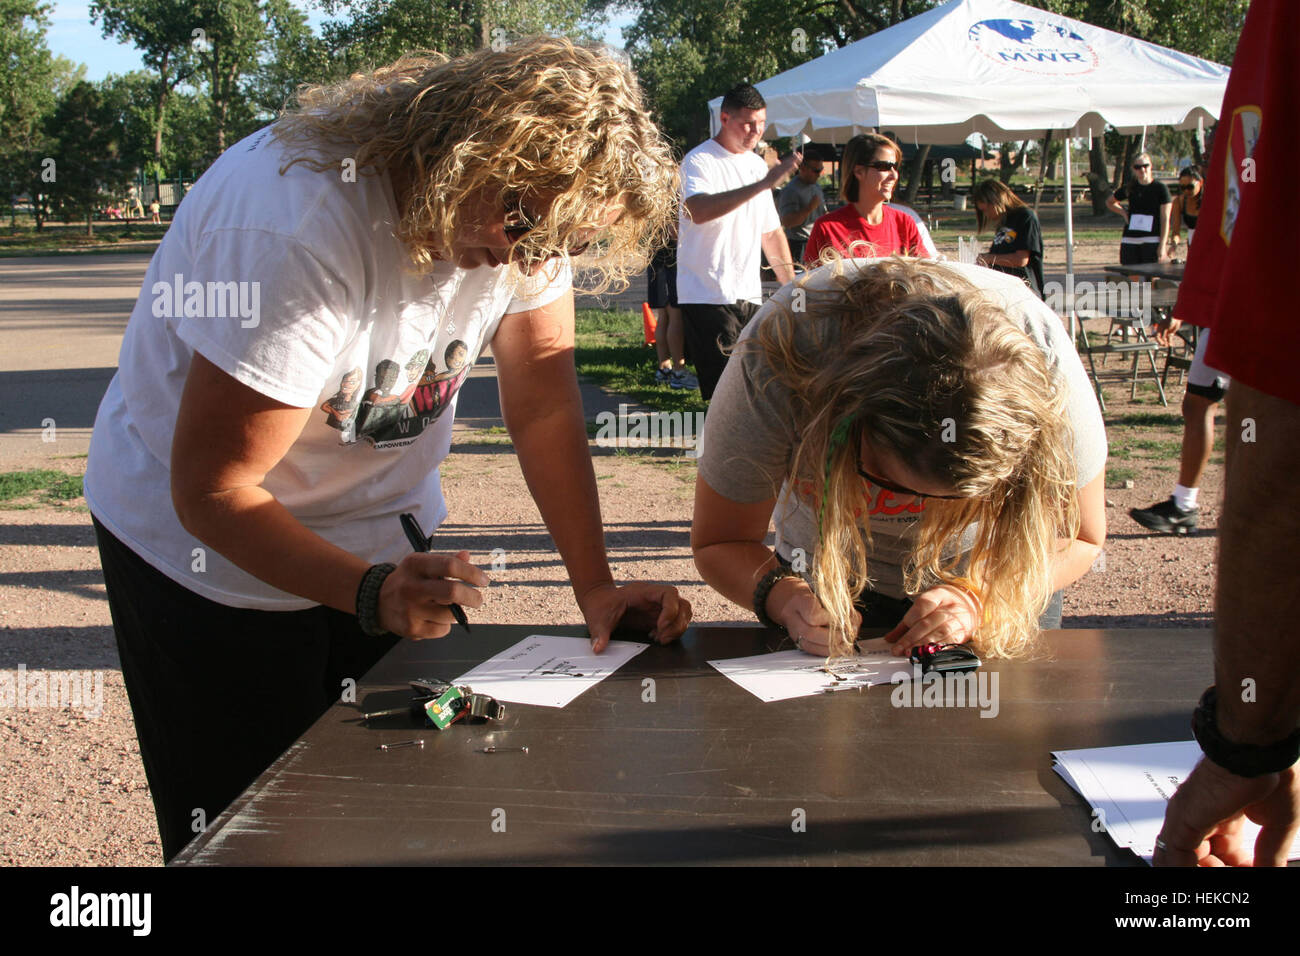 Jamie Johnson, left, and her daughter, Erica Johnson, fill out bibs before the start of the Run for the Fallen. Both women ran on behalf of Master Sgt. Charles L. Price III, Headquarters and Headquarters Company, 2nd Brigade Combat Team, 4th Infantry Division. Price died Aug. 12 in Afghanistan. Community remembers fallen 448417 Stock Photo